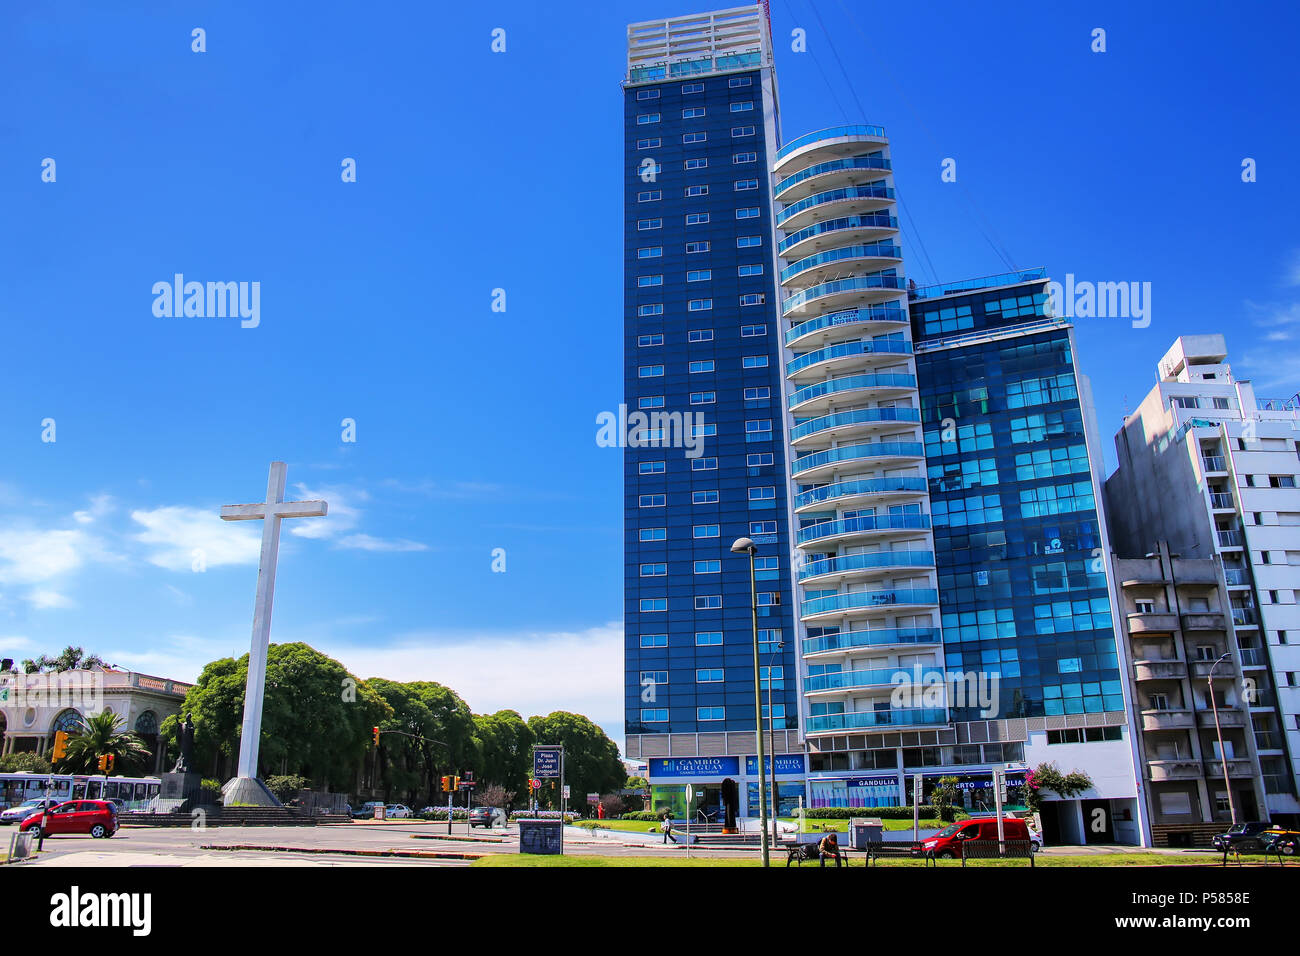 Tres Cruces district of Montevideo with Torre del Congreso, Uruguay. Montevideo is the capital and largest city of Uruguay. Stock Photo